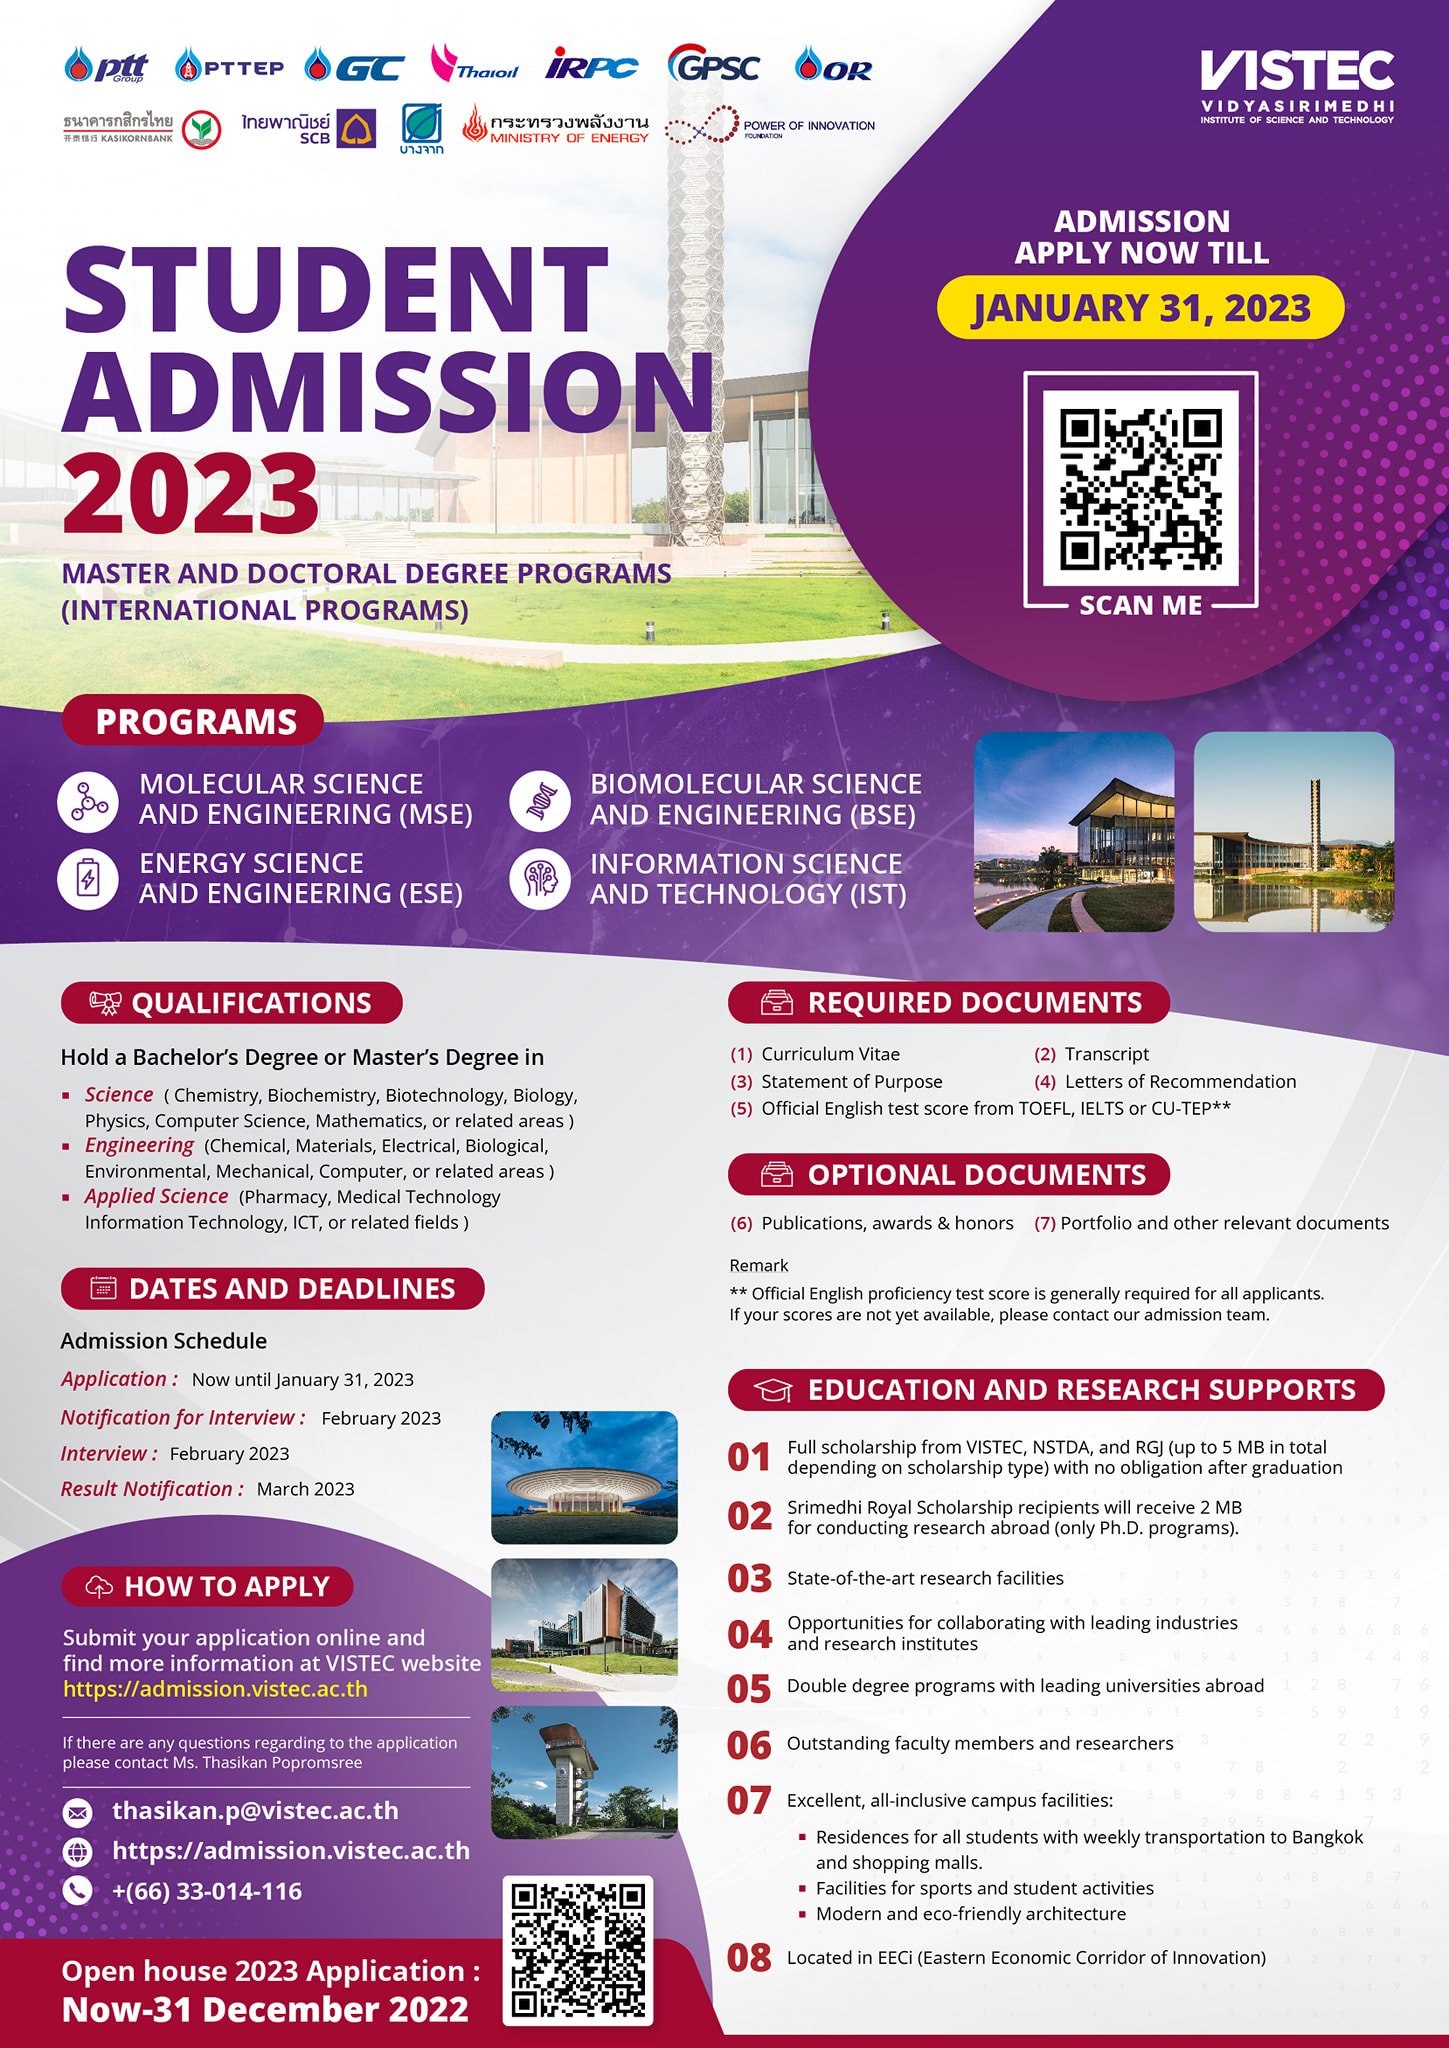 On behalf of VISTEC Admission Team, we would like to announce that VISTEC Admission 2023 is NOW OPEN!!, and we are ready to search for new talented students to join our research community. Check out for more details at https://admission.vistec.ac.th/